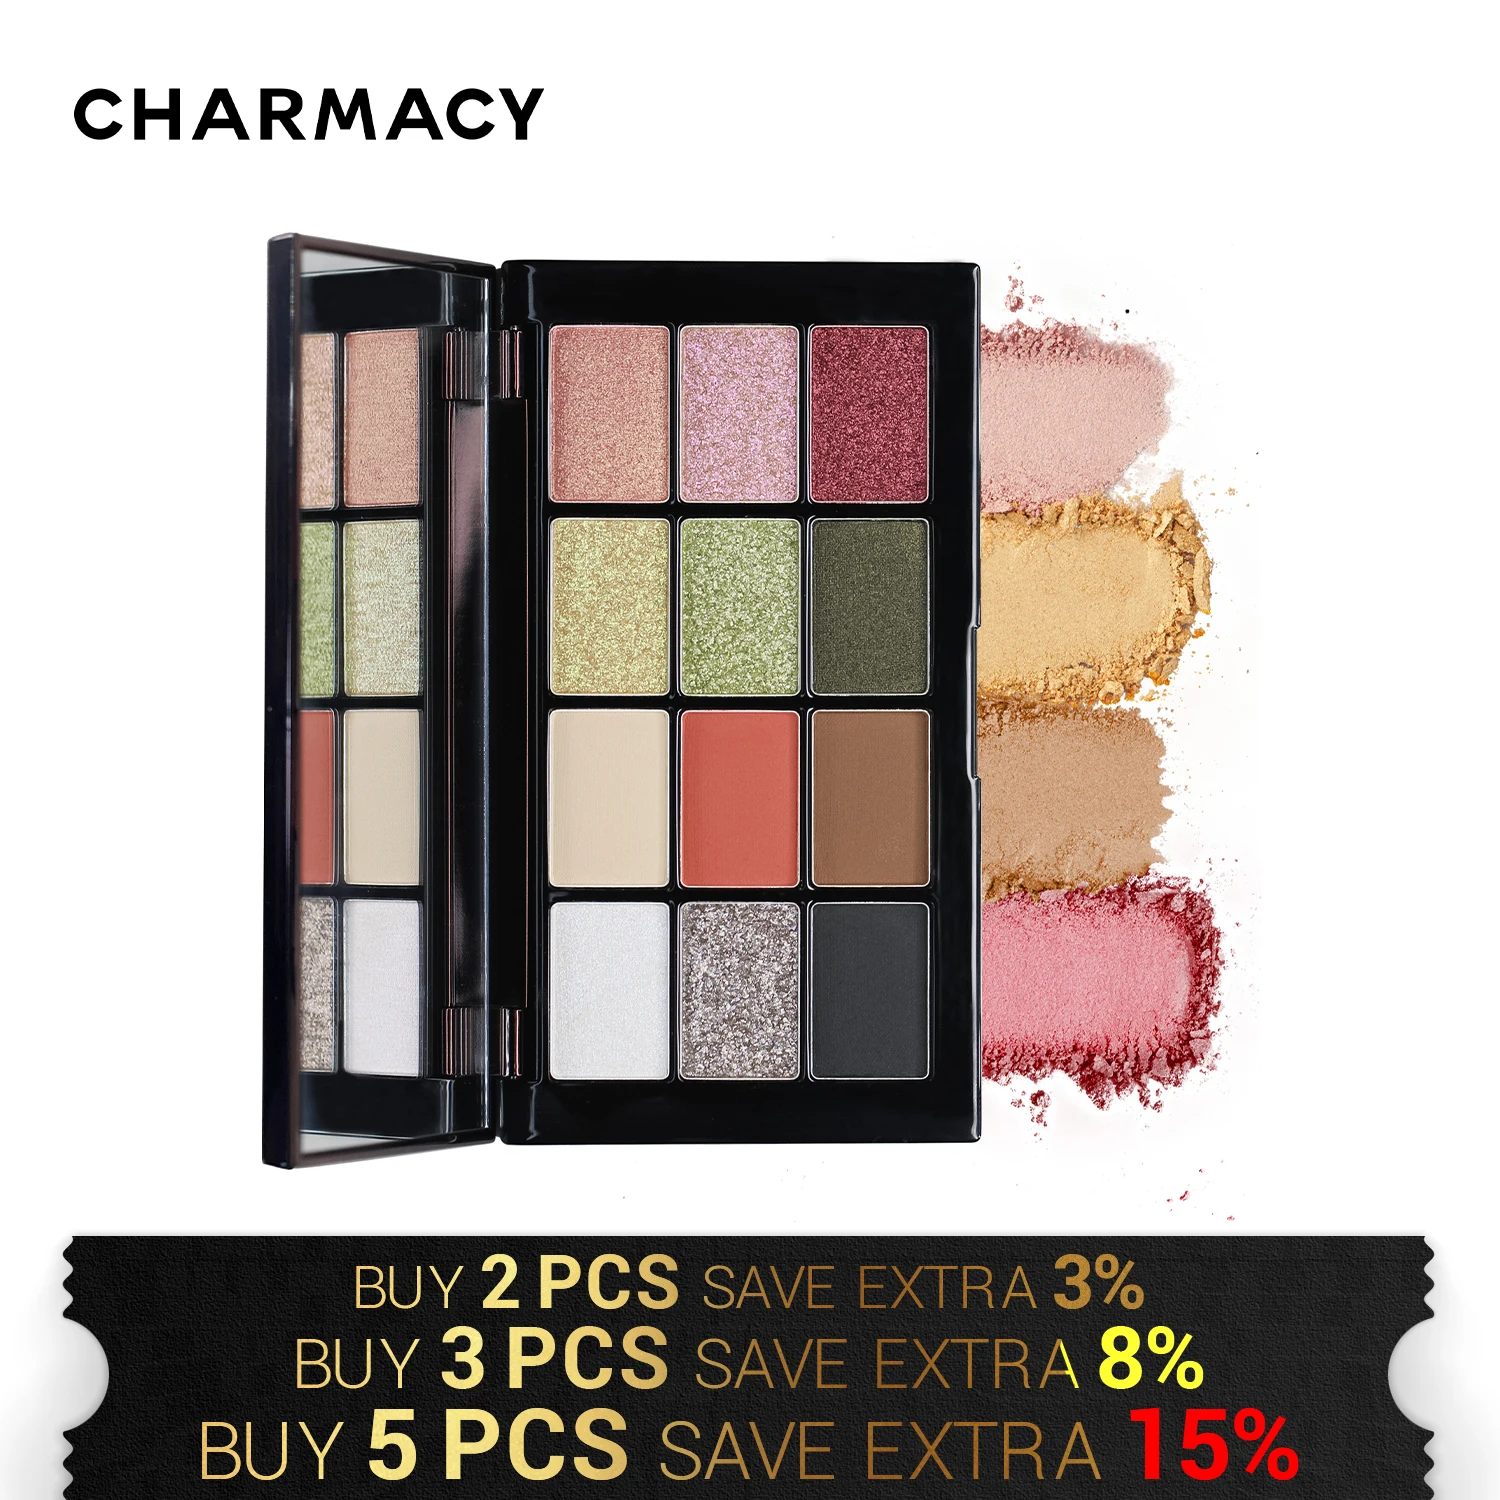 CHARMACY 12 Colors Glitter Eyeshadows Palette High Quality Professional Eye Shadow Makeup for Women Cosmetic Free Shipping